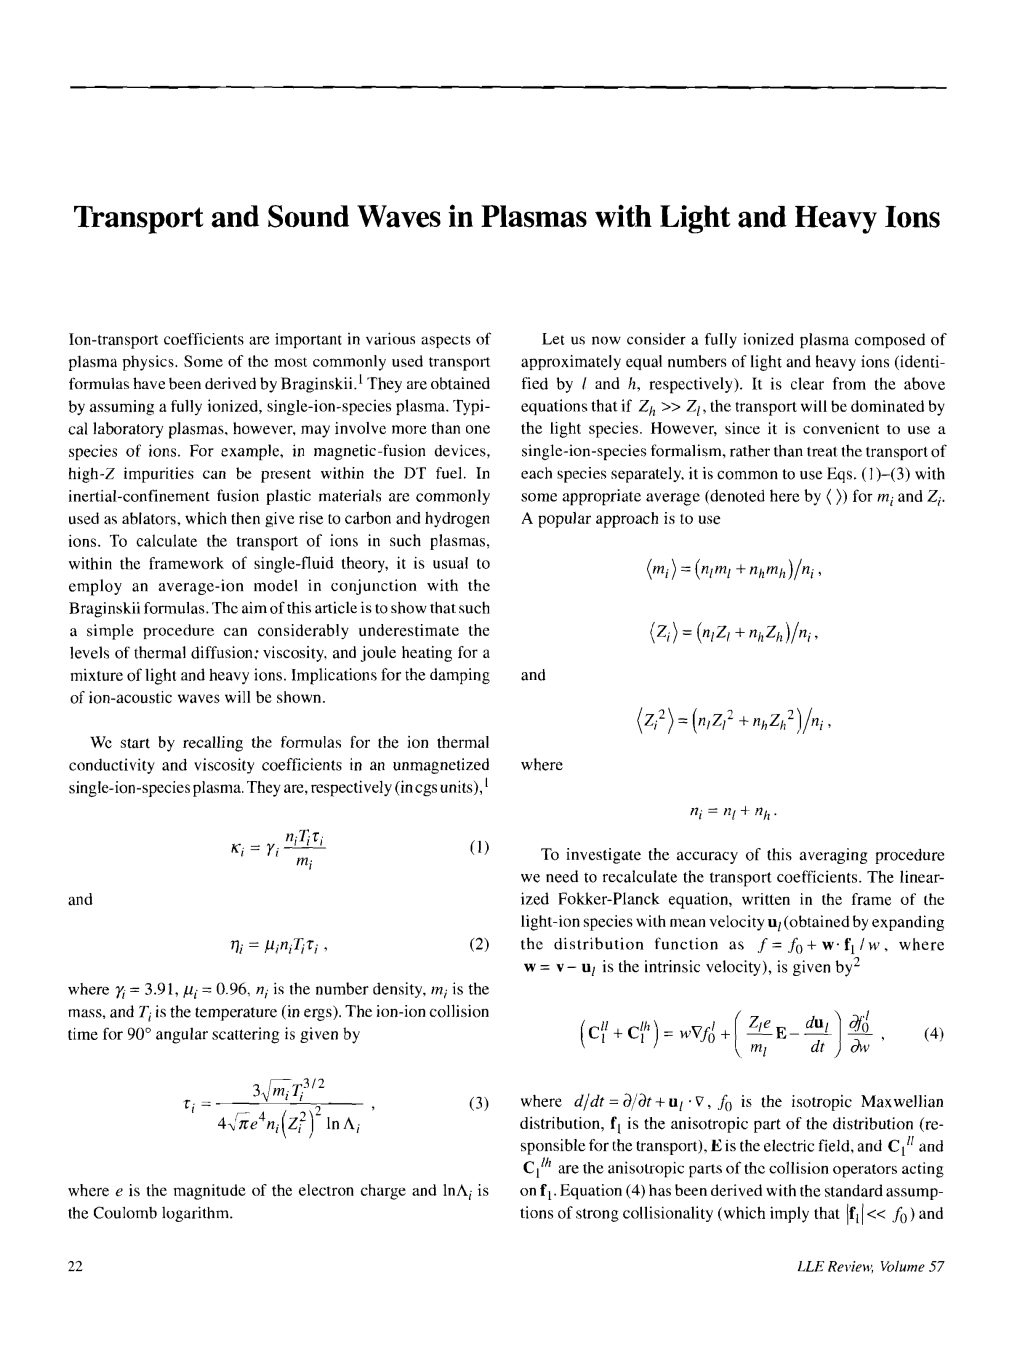 Transport and Sound Waves in Plasmas with Light and Heavy Ions